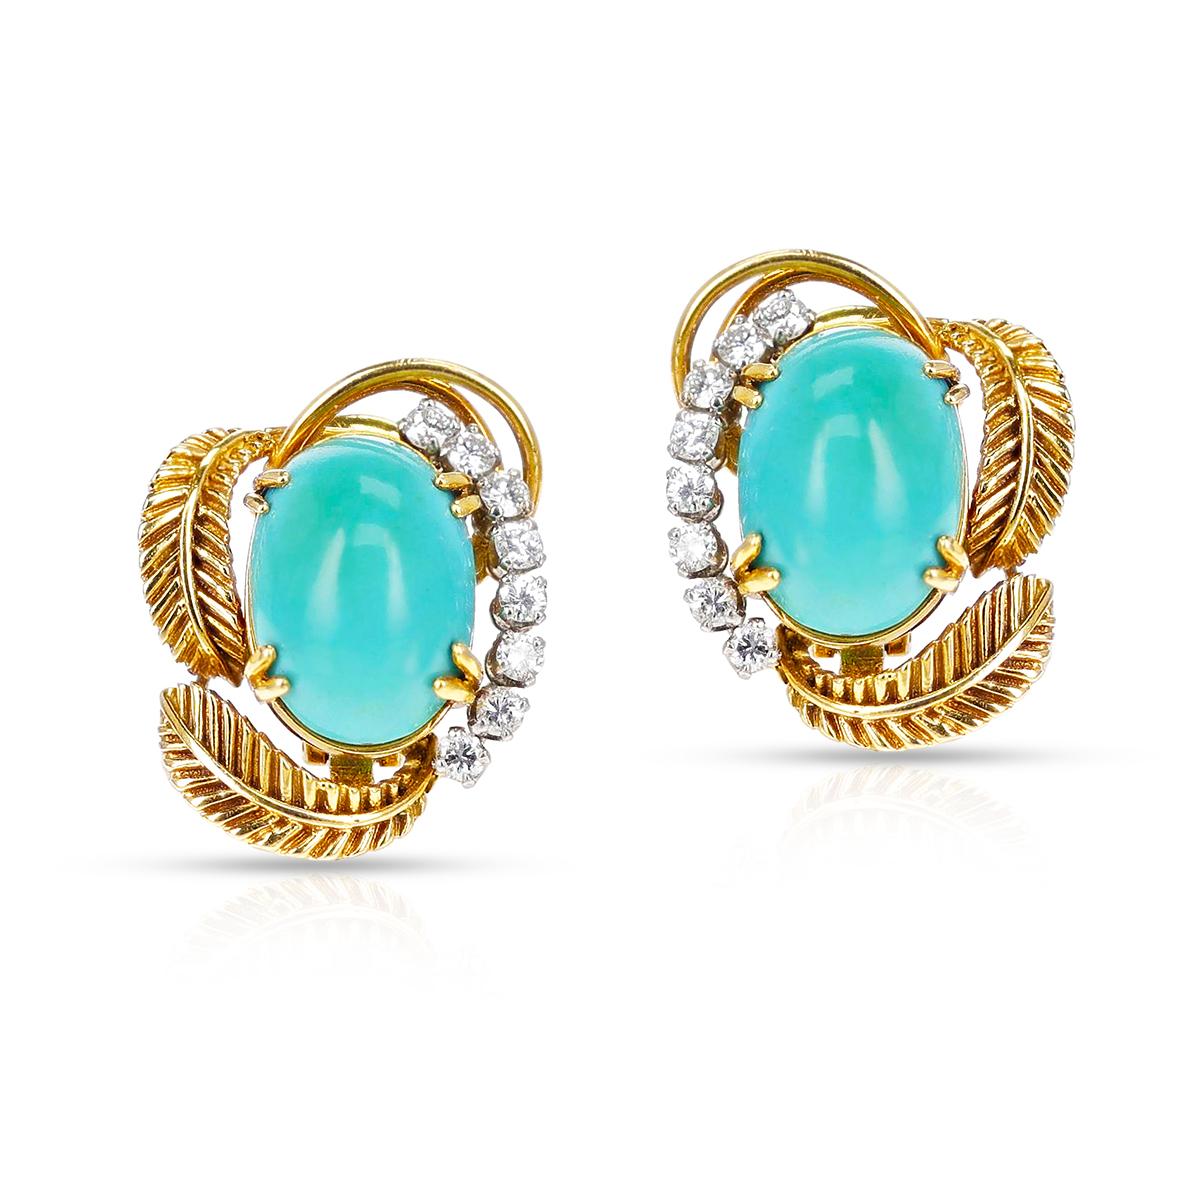 A pair of Boucheron Turquoise Cabochon and Diamond Earrings made in 18 Karat Yellow Gold.
